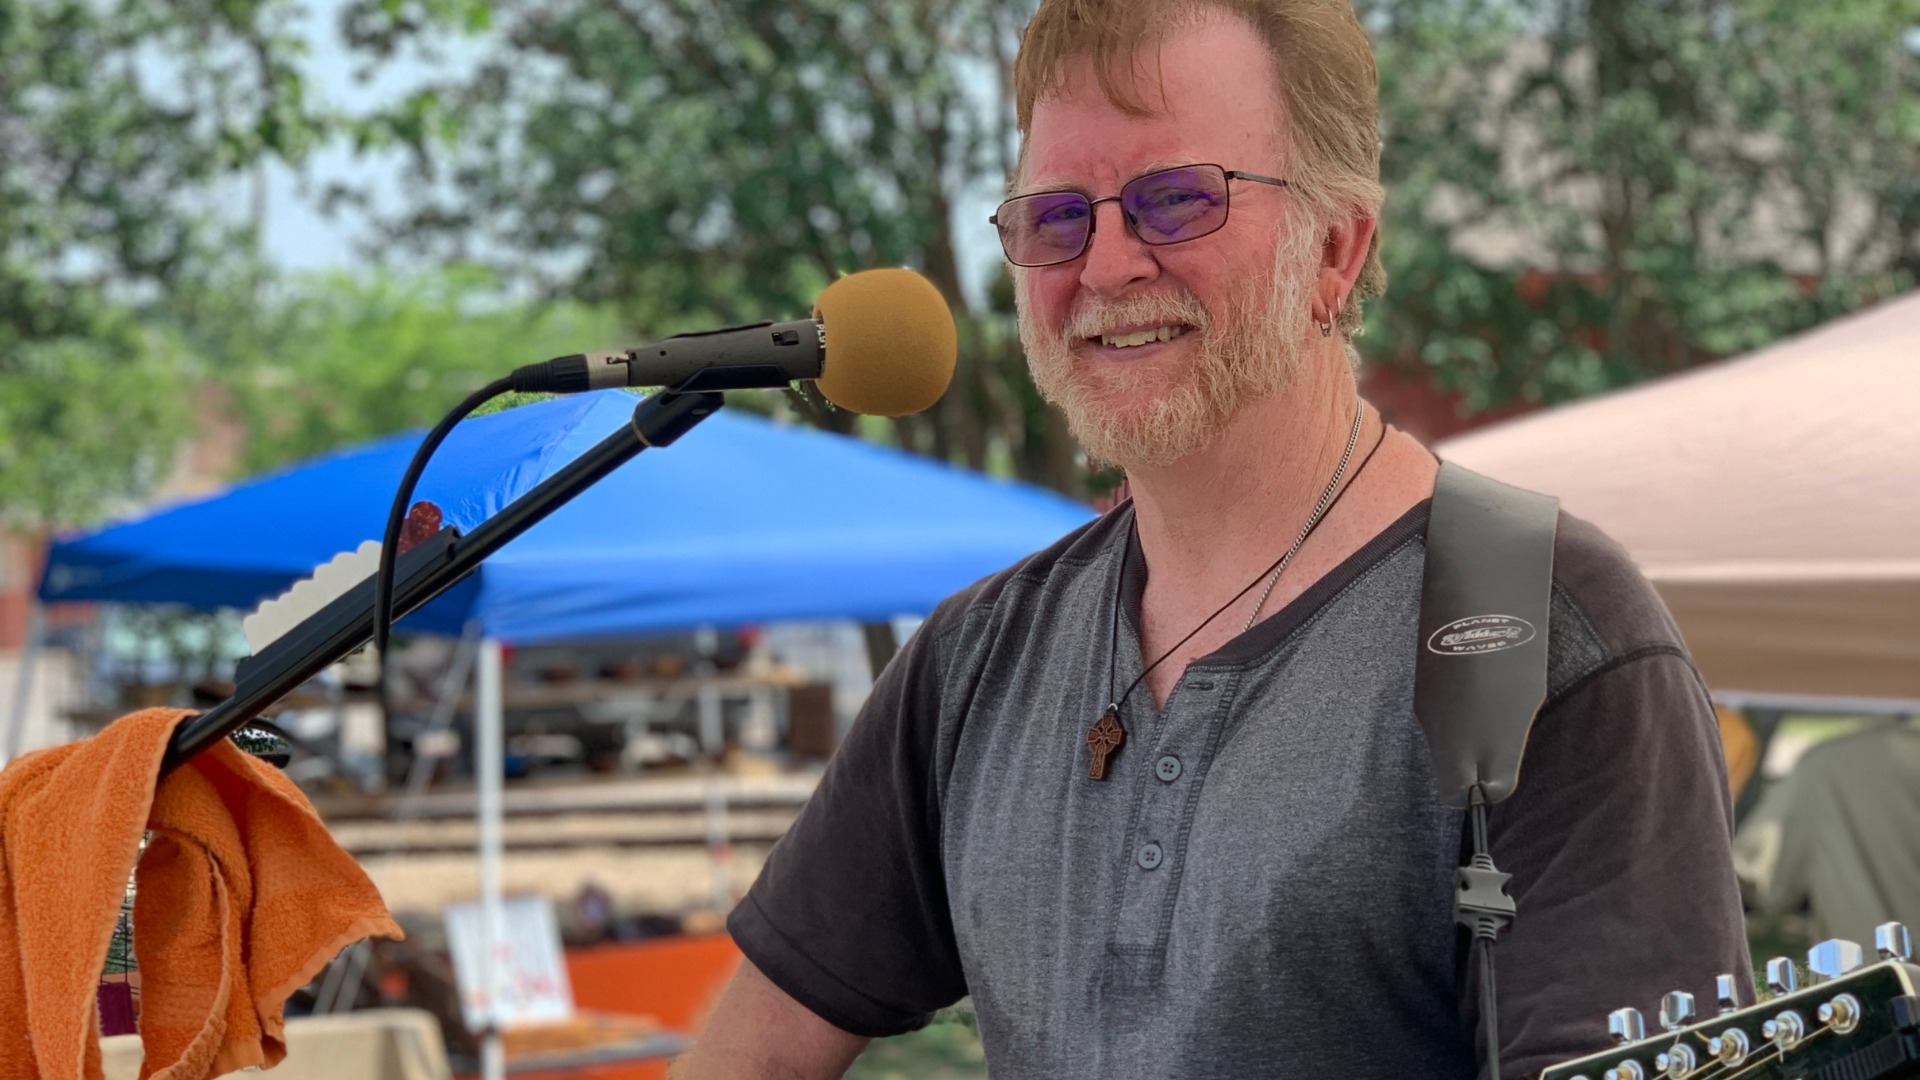 Live local music with Sam Long